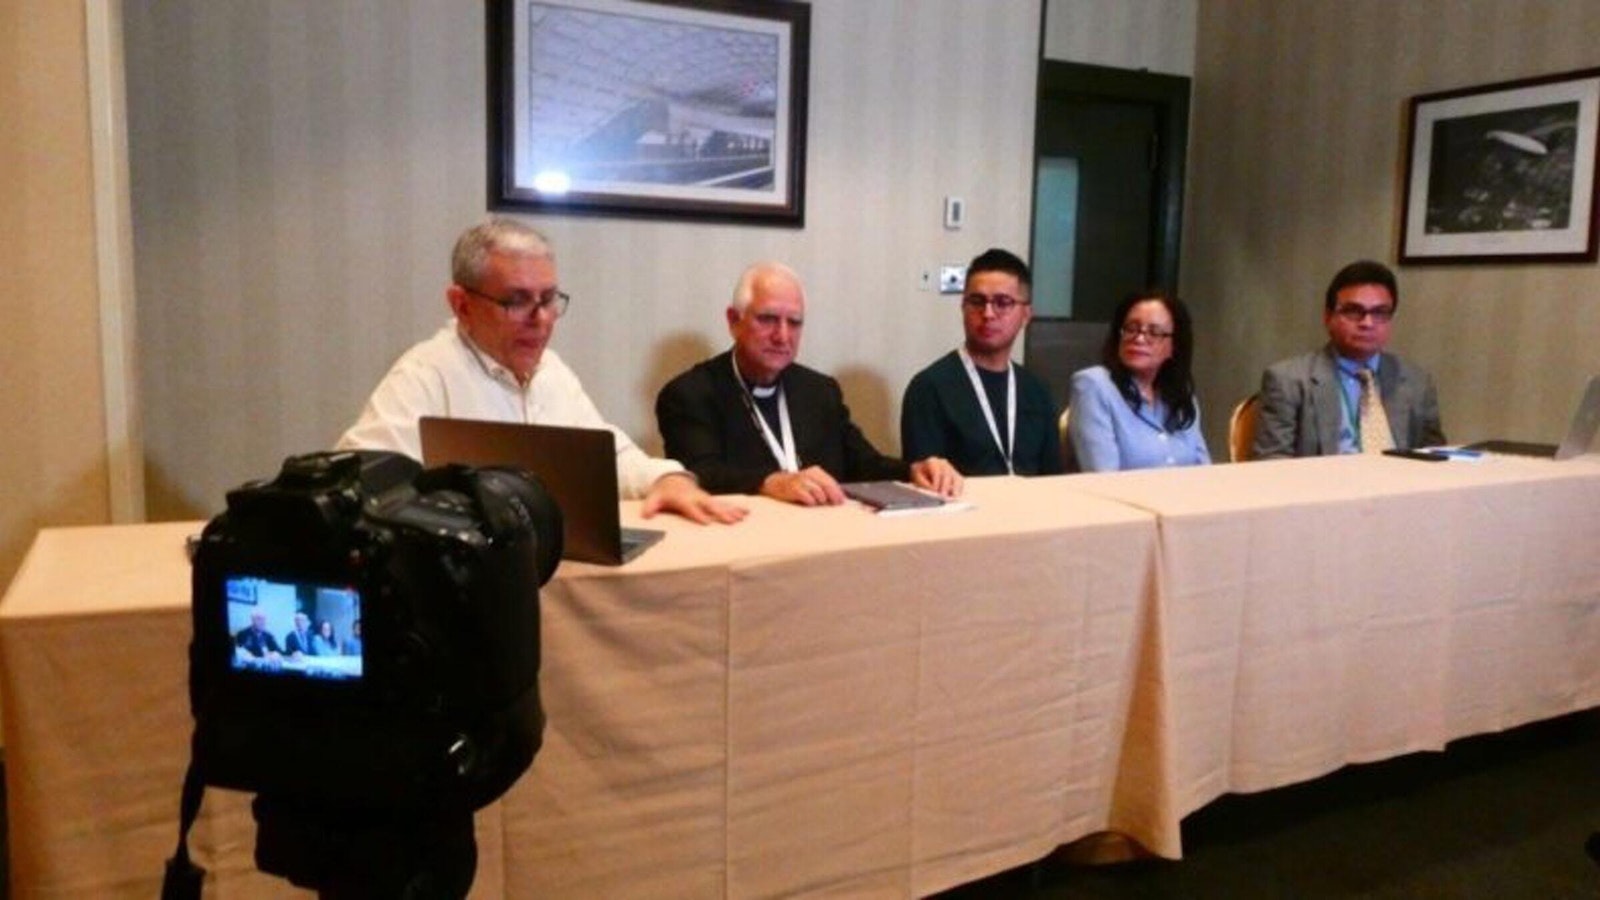 Elisabeth Román, Antonio Guzmán and Archbishop Jorge Eduardo Lozano participate in a news conference during the National Catholic Council for Hispanic Ministry (NCCHM)'s National Catholic Congress of Hispanic Pastoral Care "Raíces y Alas" — Roots and Wings conference. (Photo courtesy of CELAM)